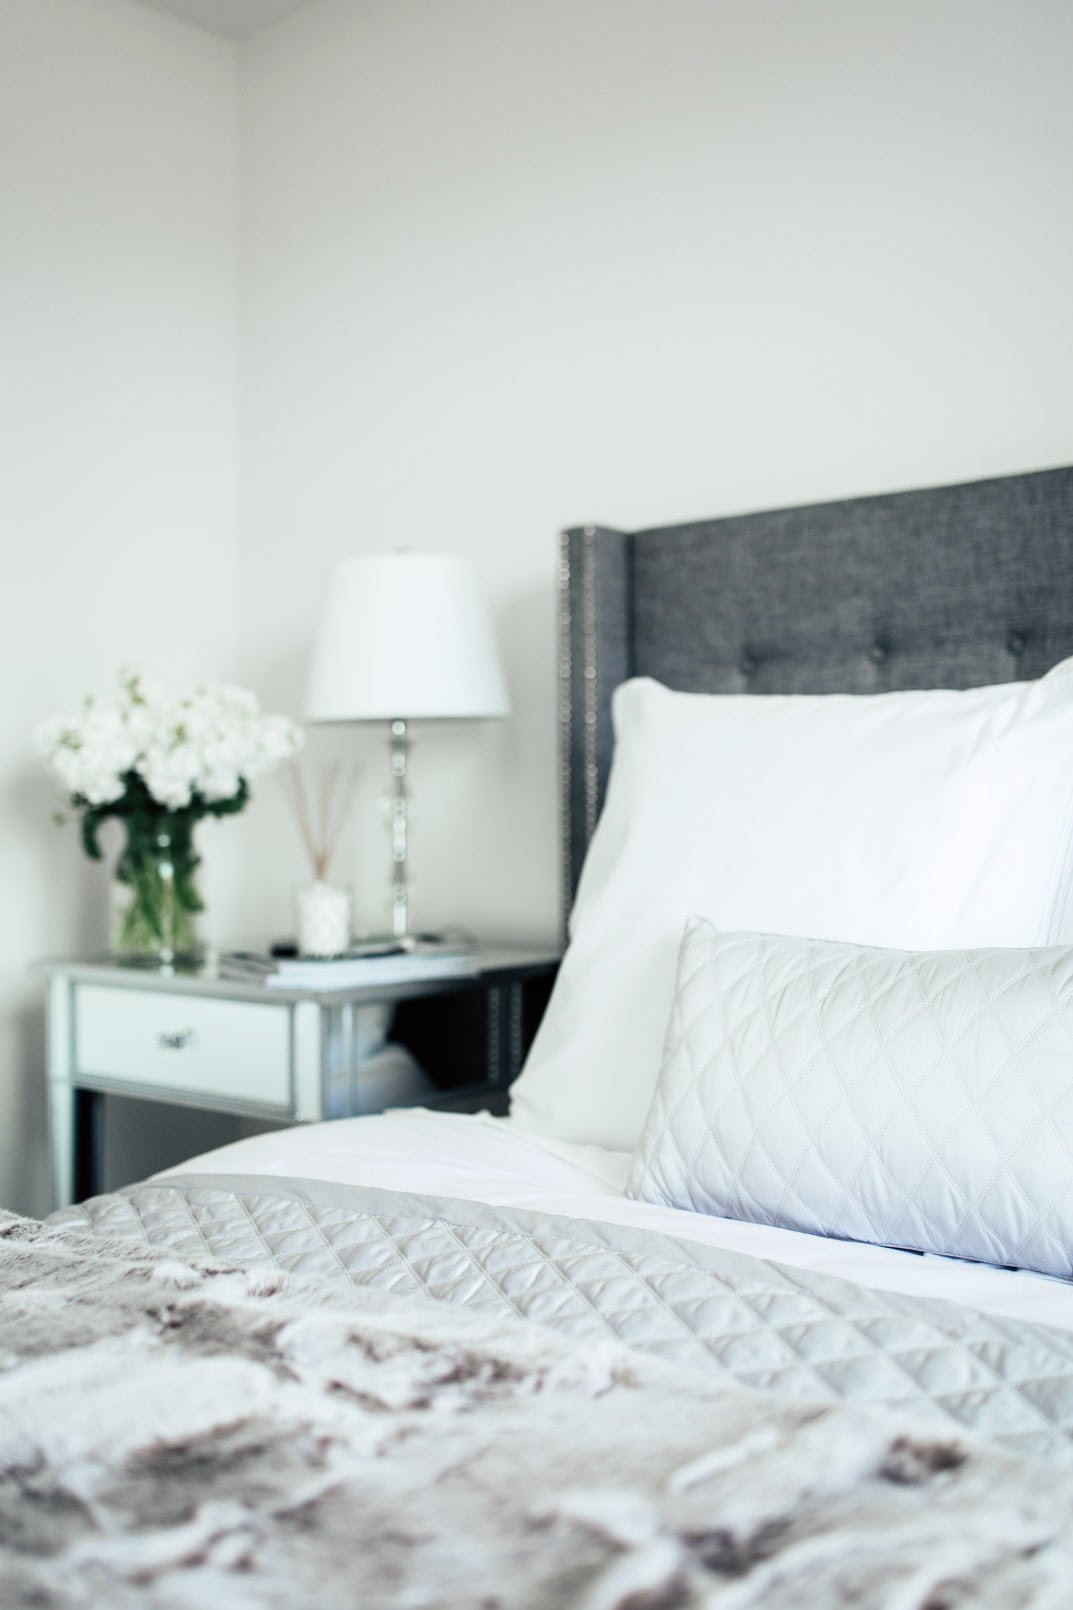 5 Ways to Add a Touch of Glamour to Your Bedroom | The Girl From Panama